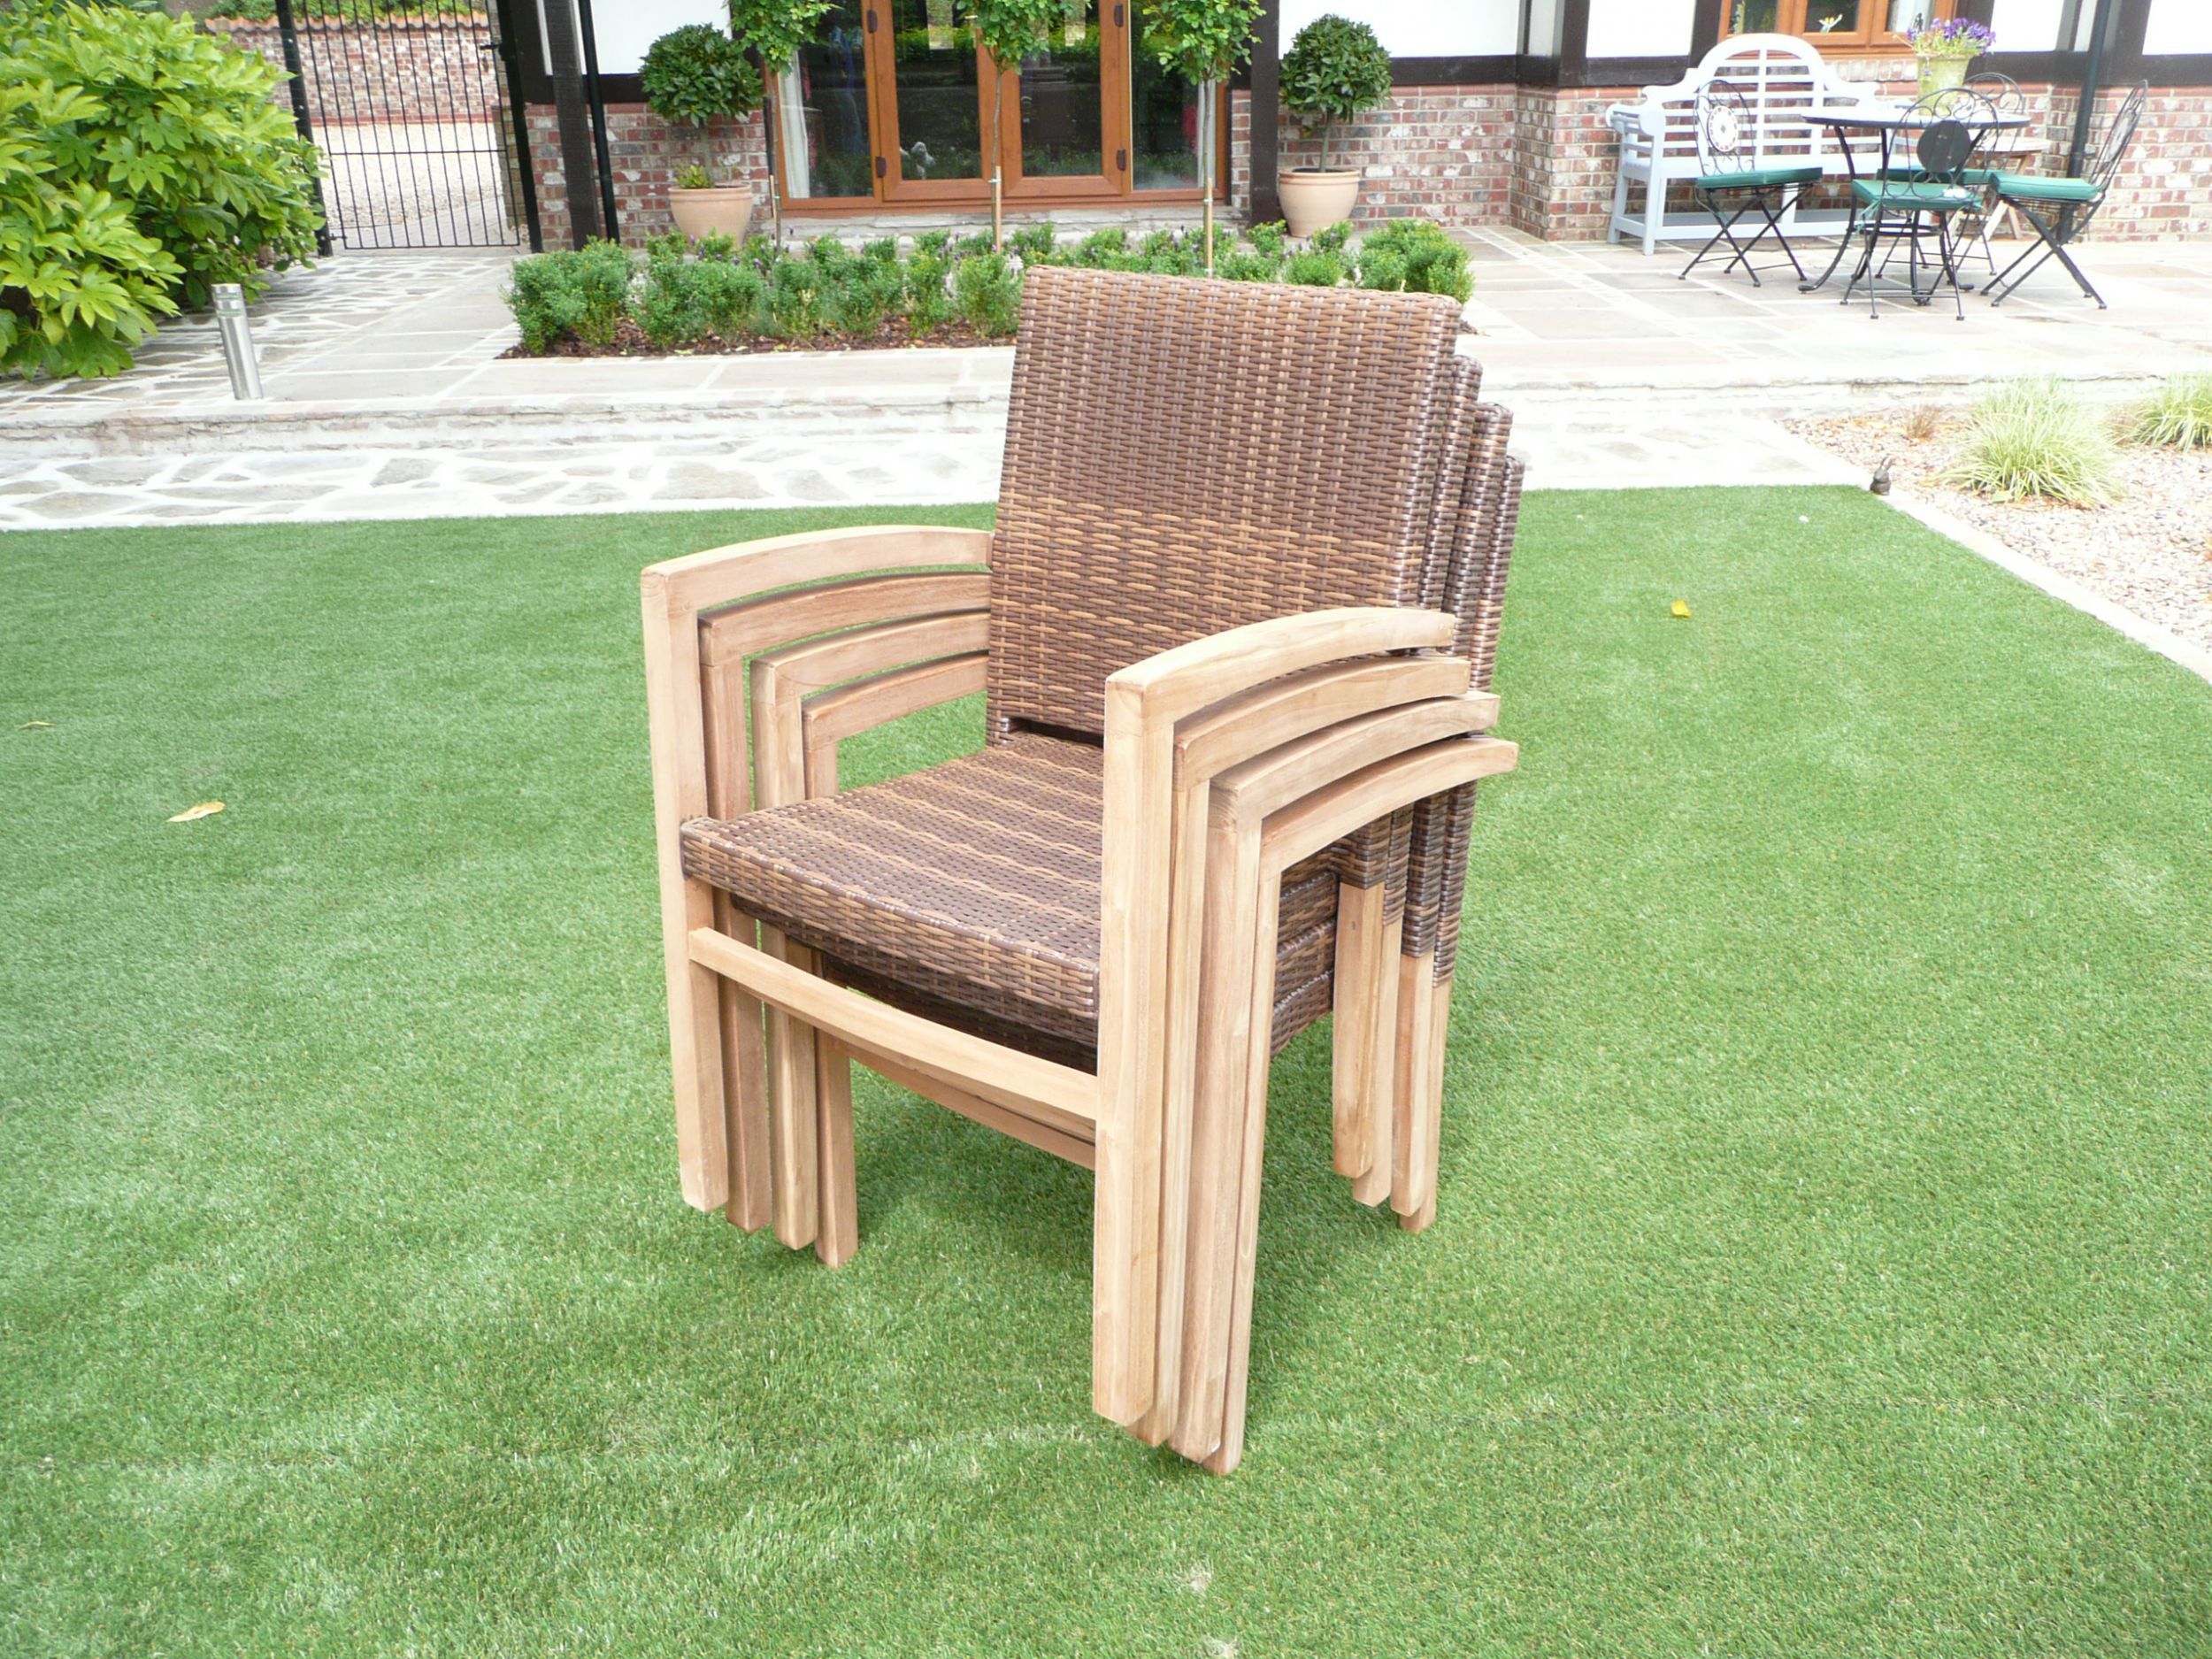 Cannes 8 Seater Teak & Rattan Patio Set | Humber Imports Within Teak Outdoor Loungers Sets (View 14 of 15)